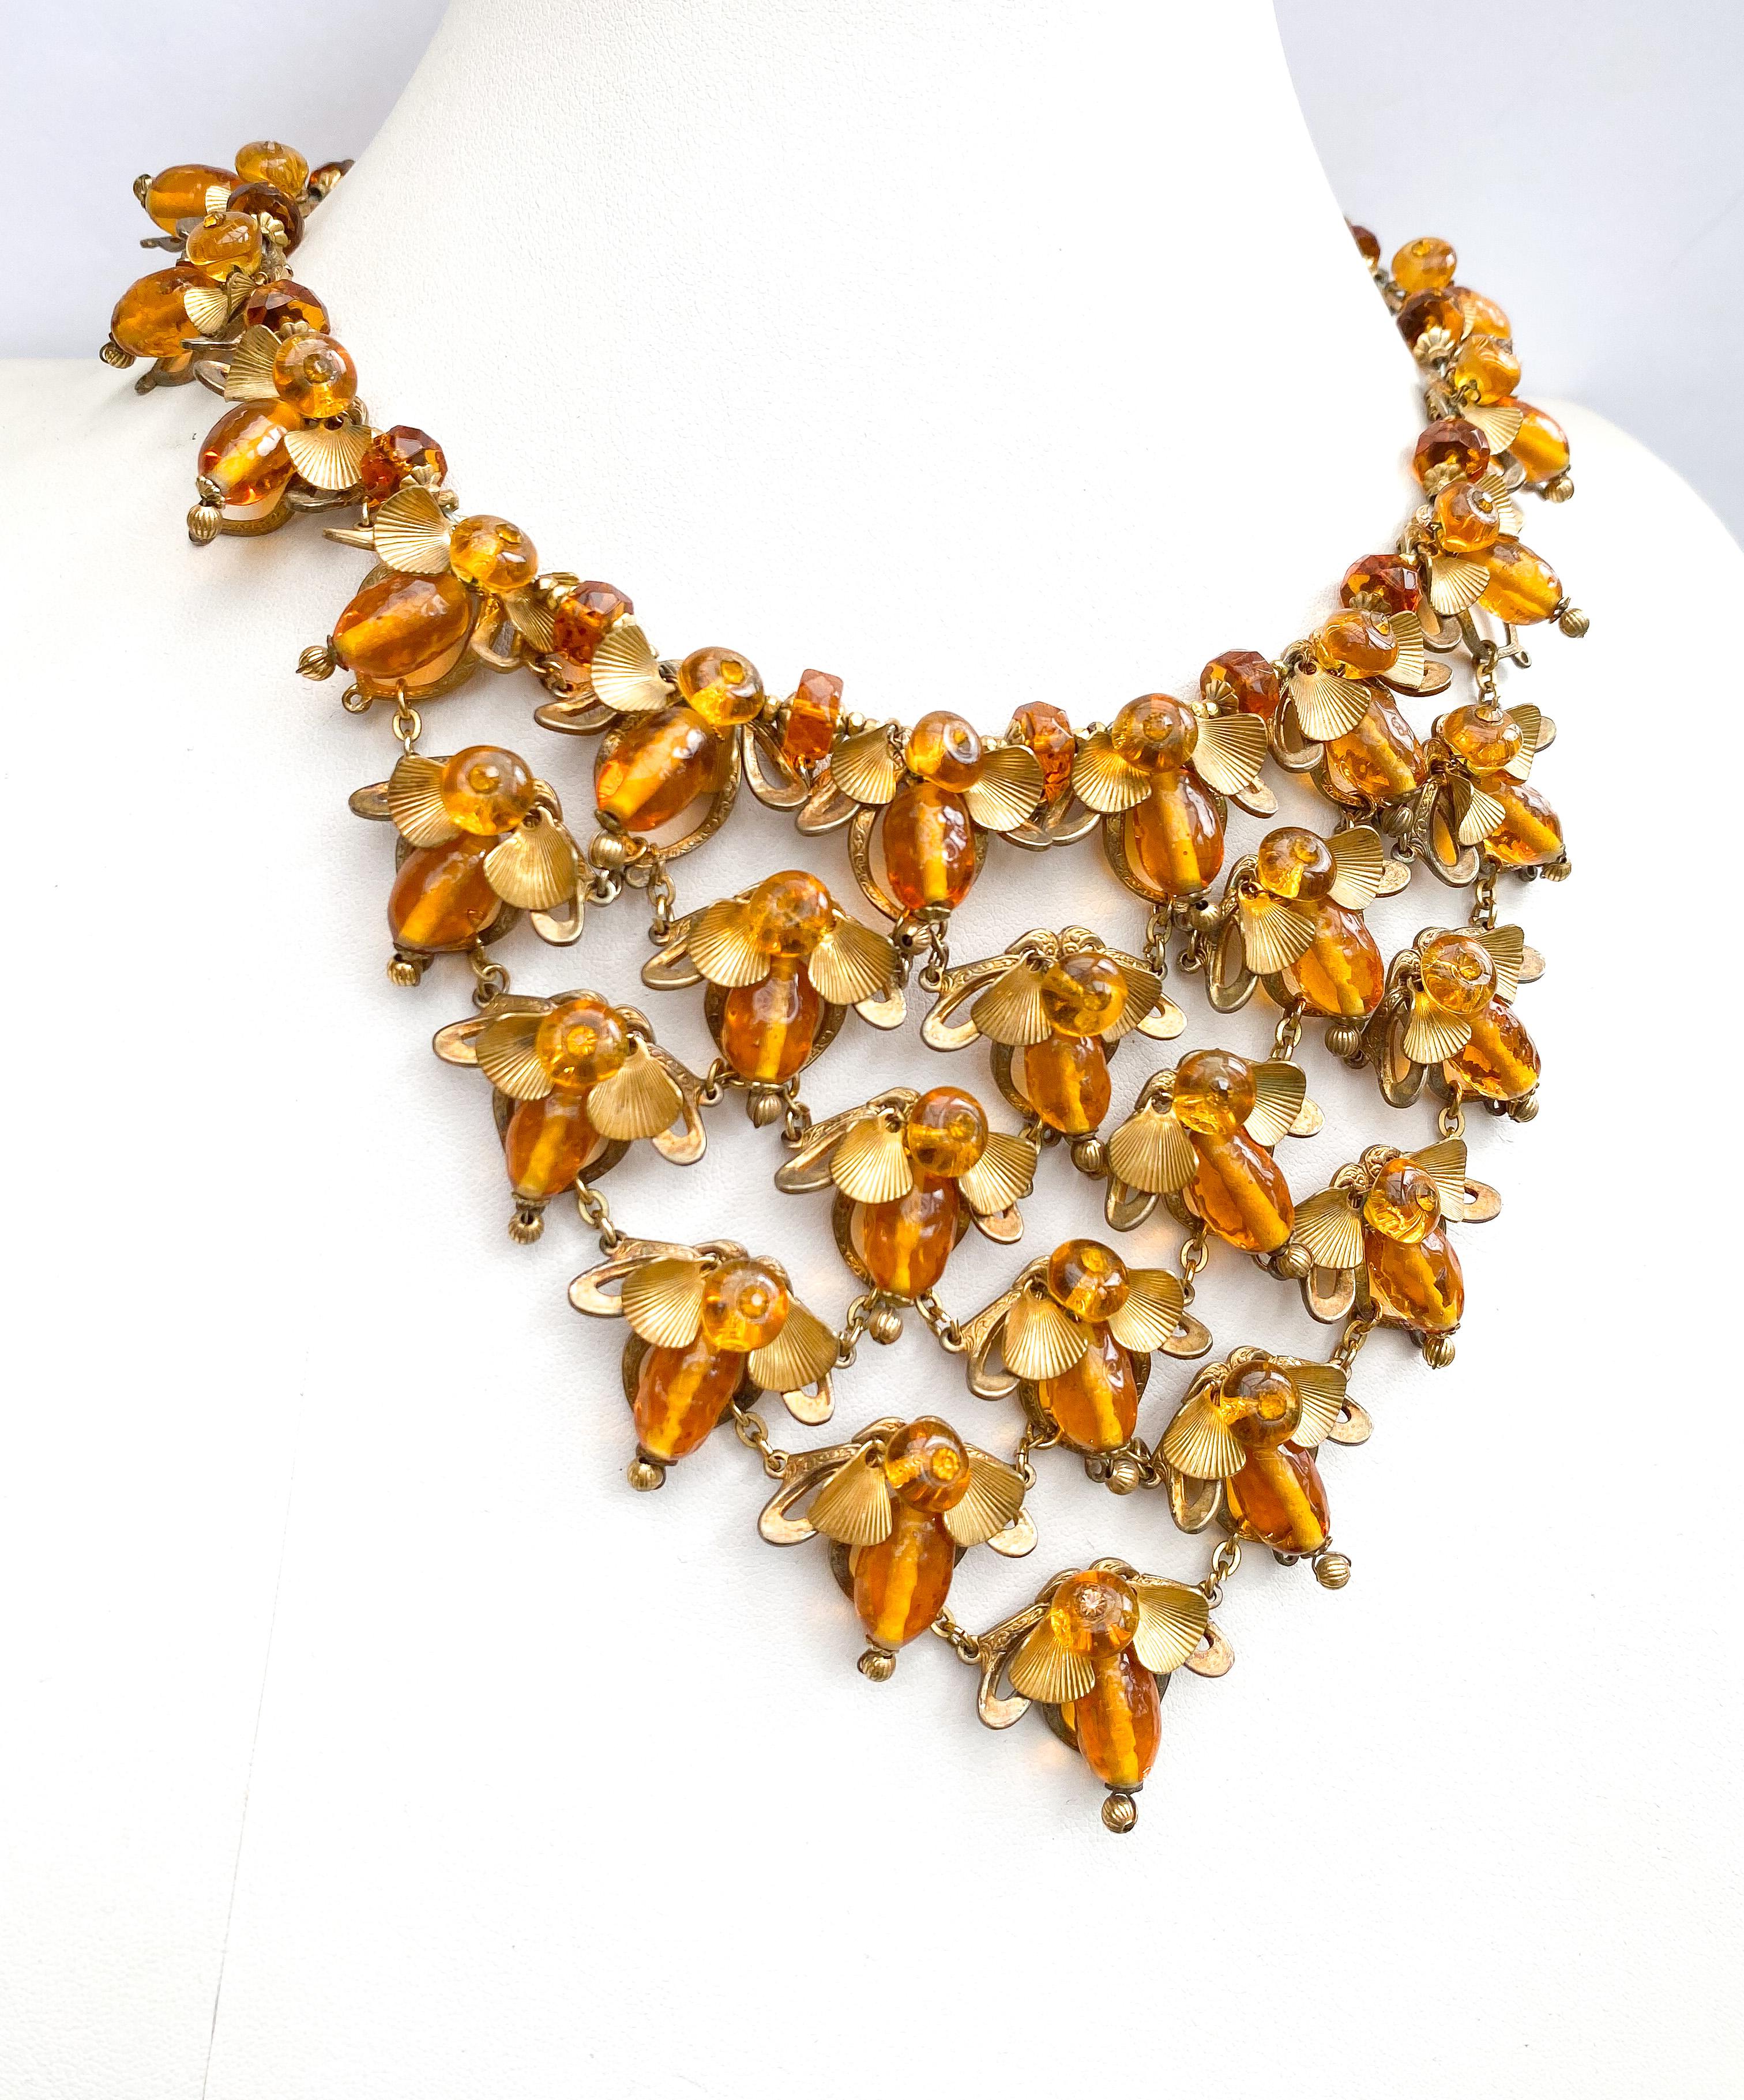 A magnificent topaz glass bead necklace, with 'bee' motif, Miriam Haskell, c1965 6